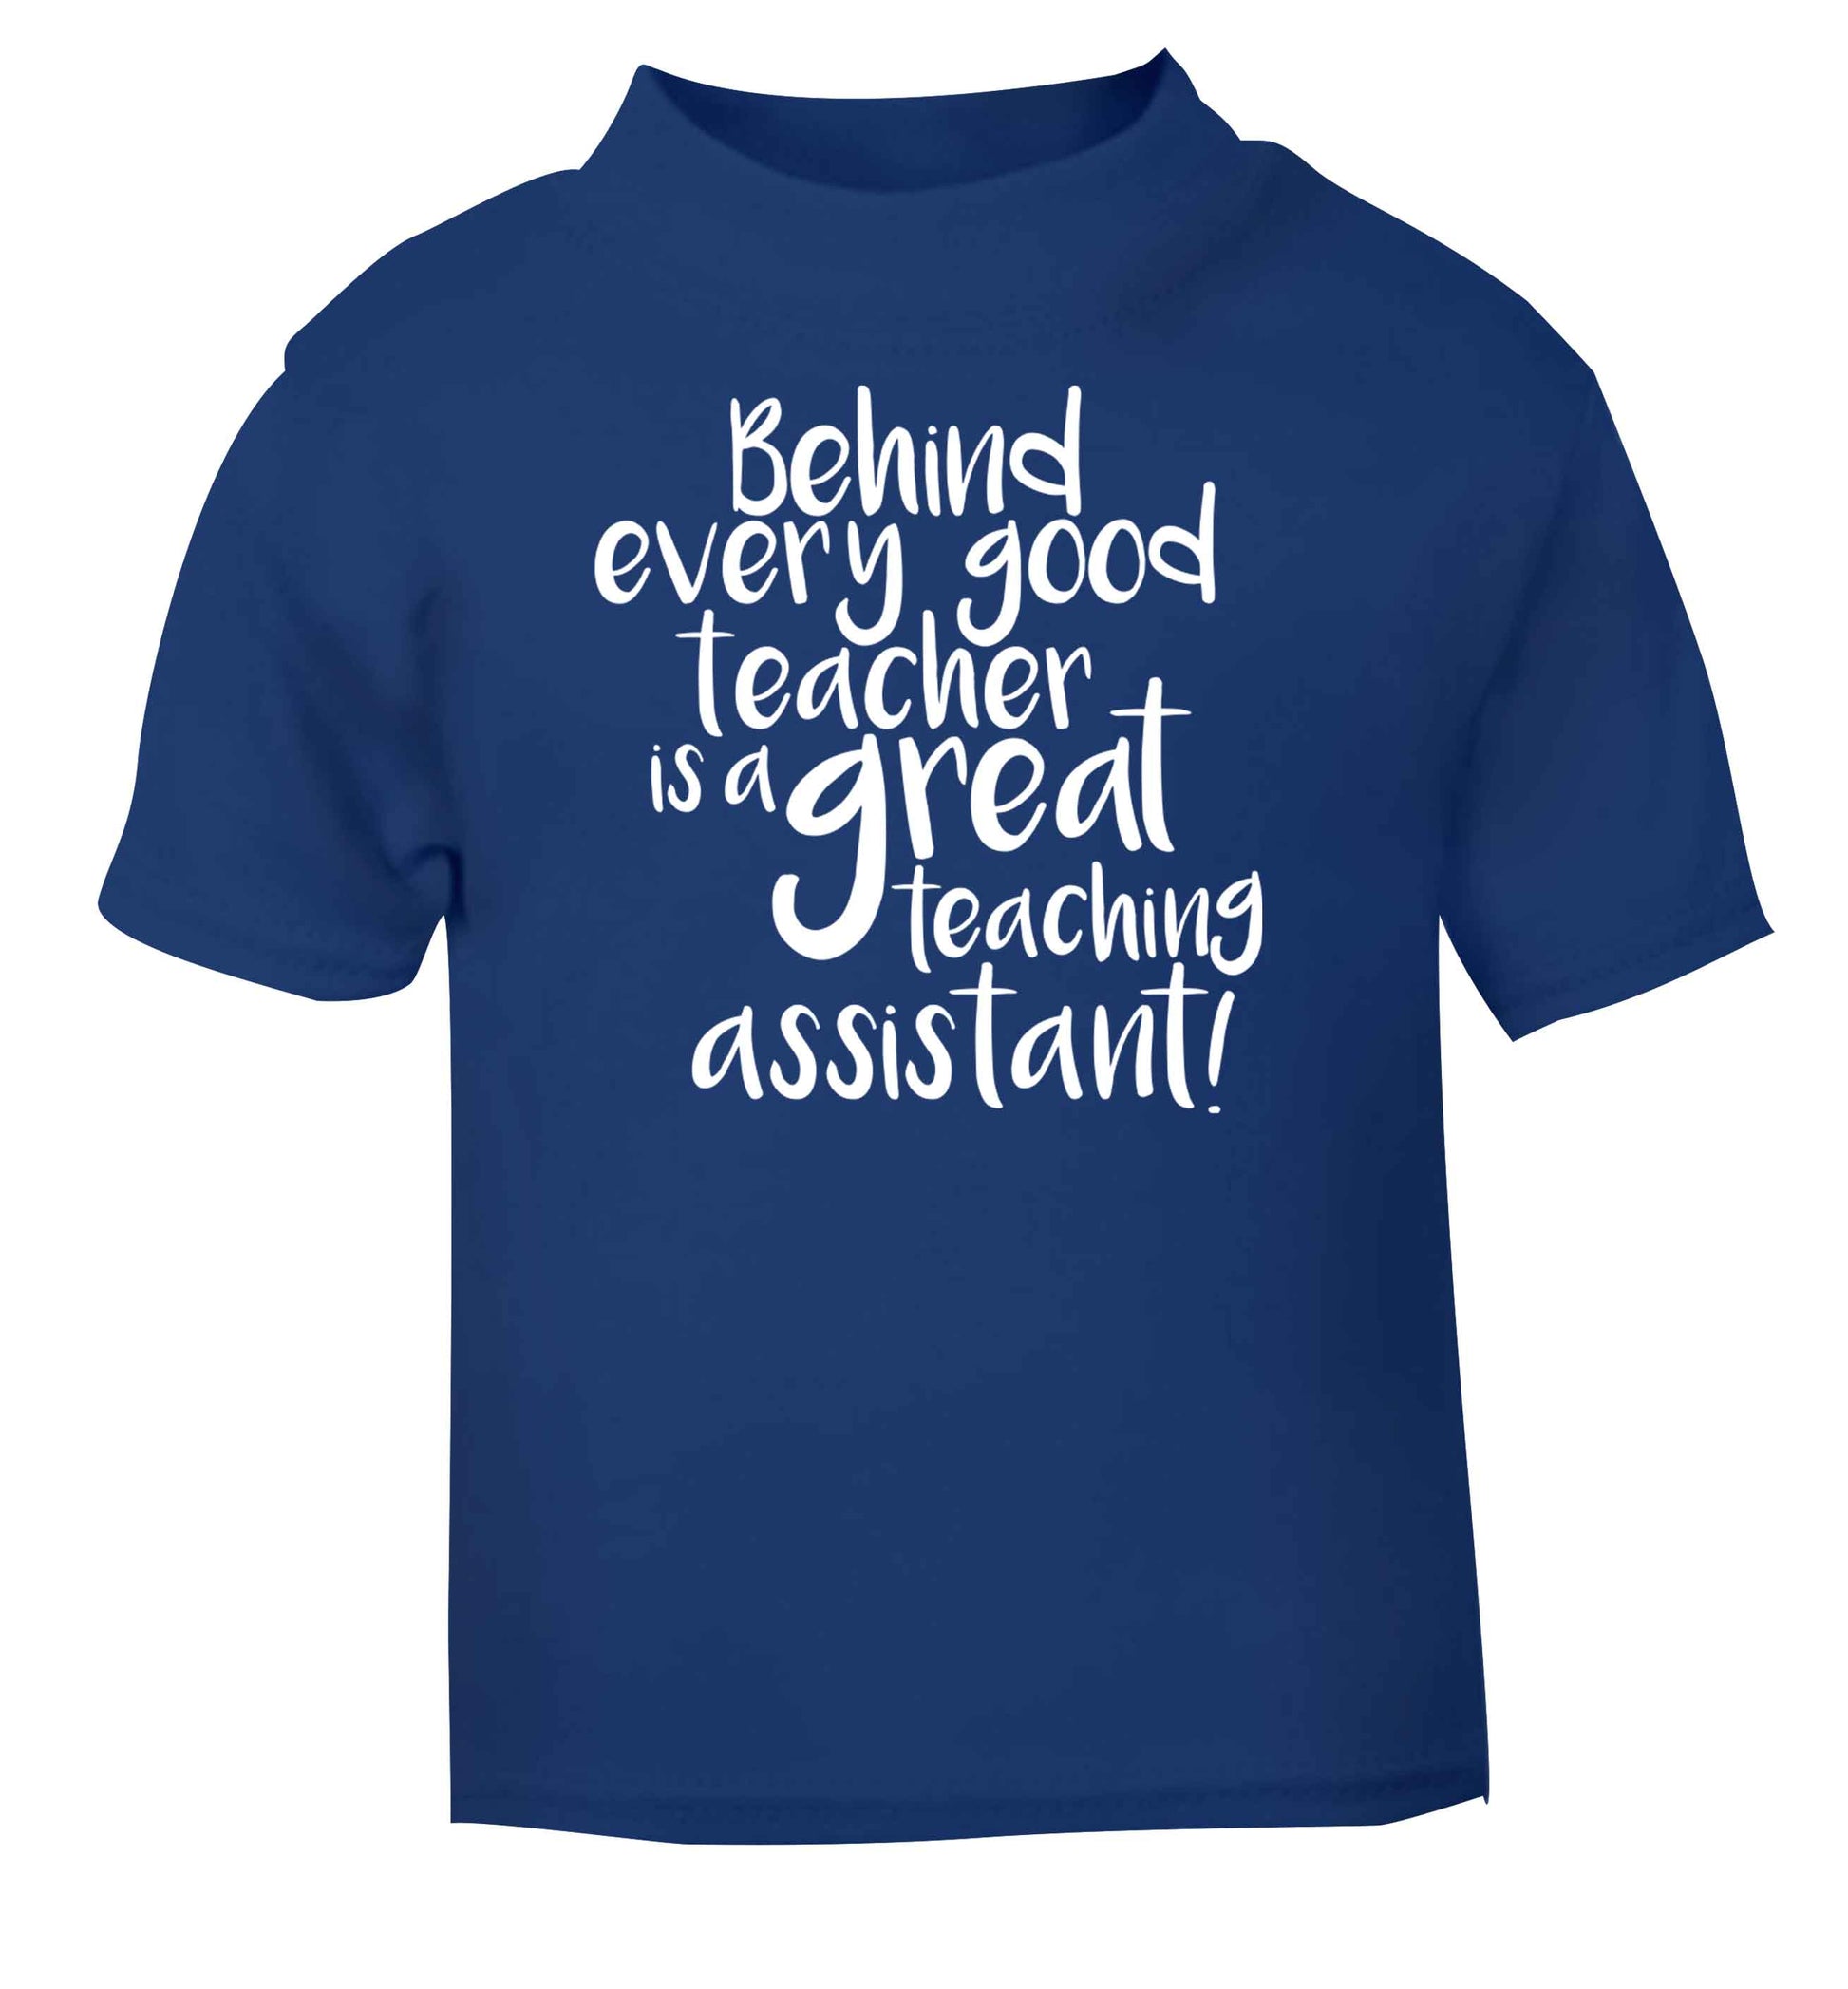 Behind every good teacher is a great teaching assistant blue baby toddler Tshirt 2 Years